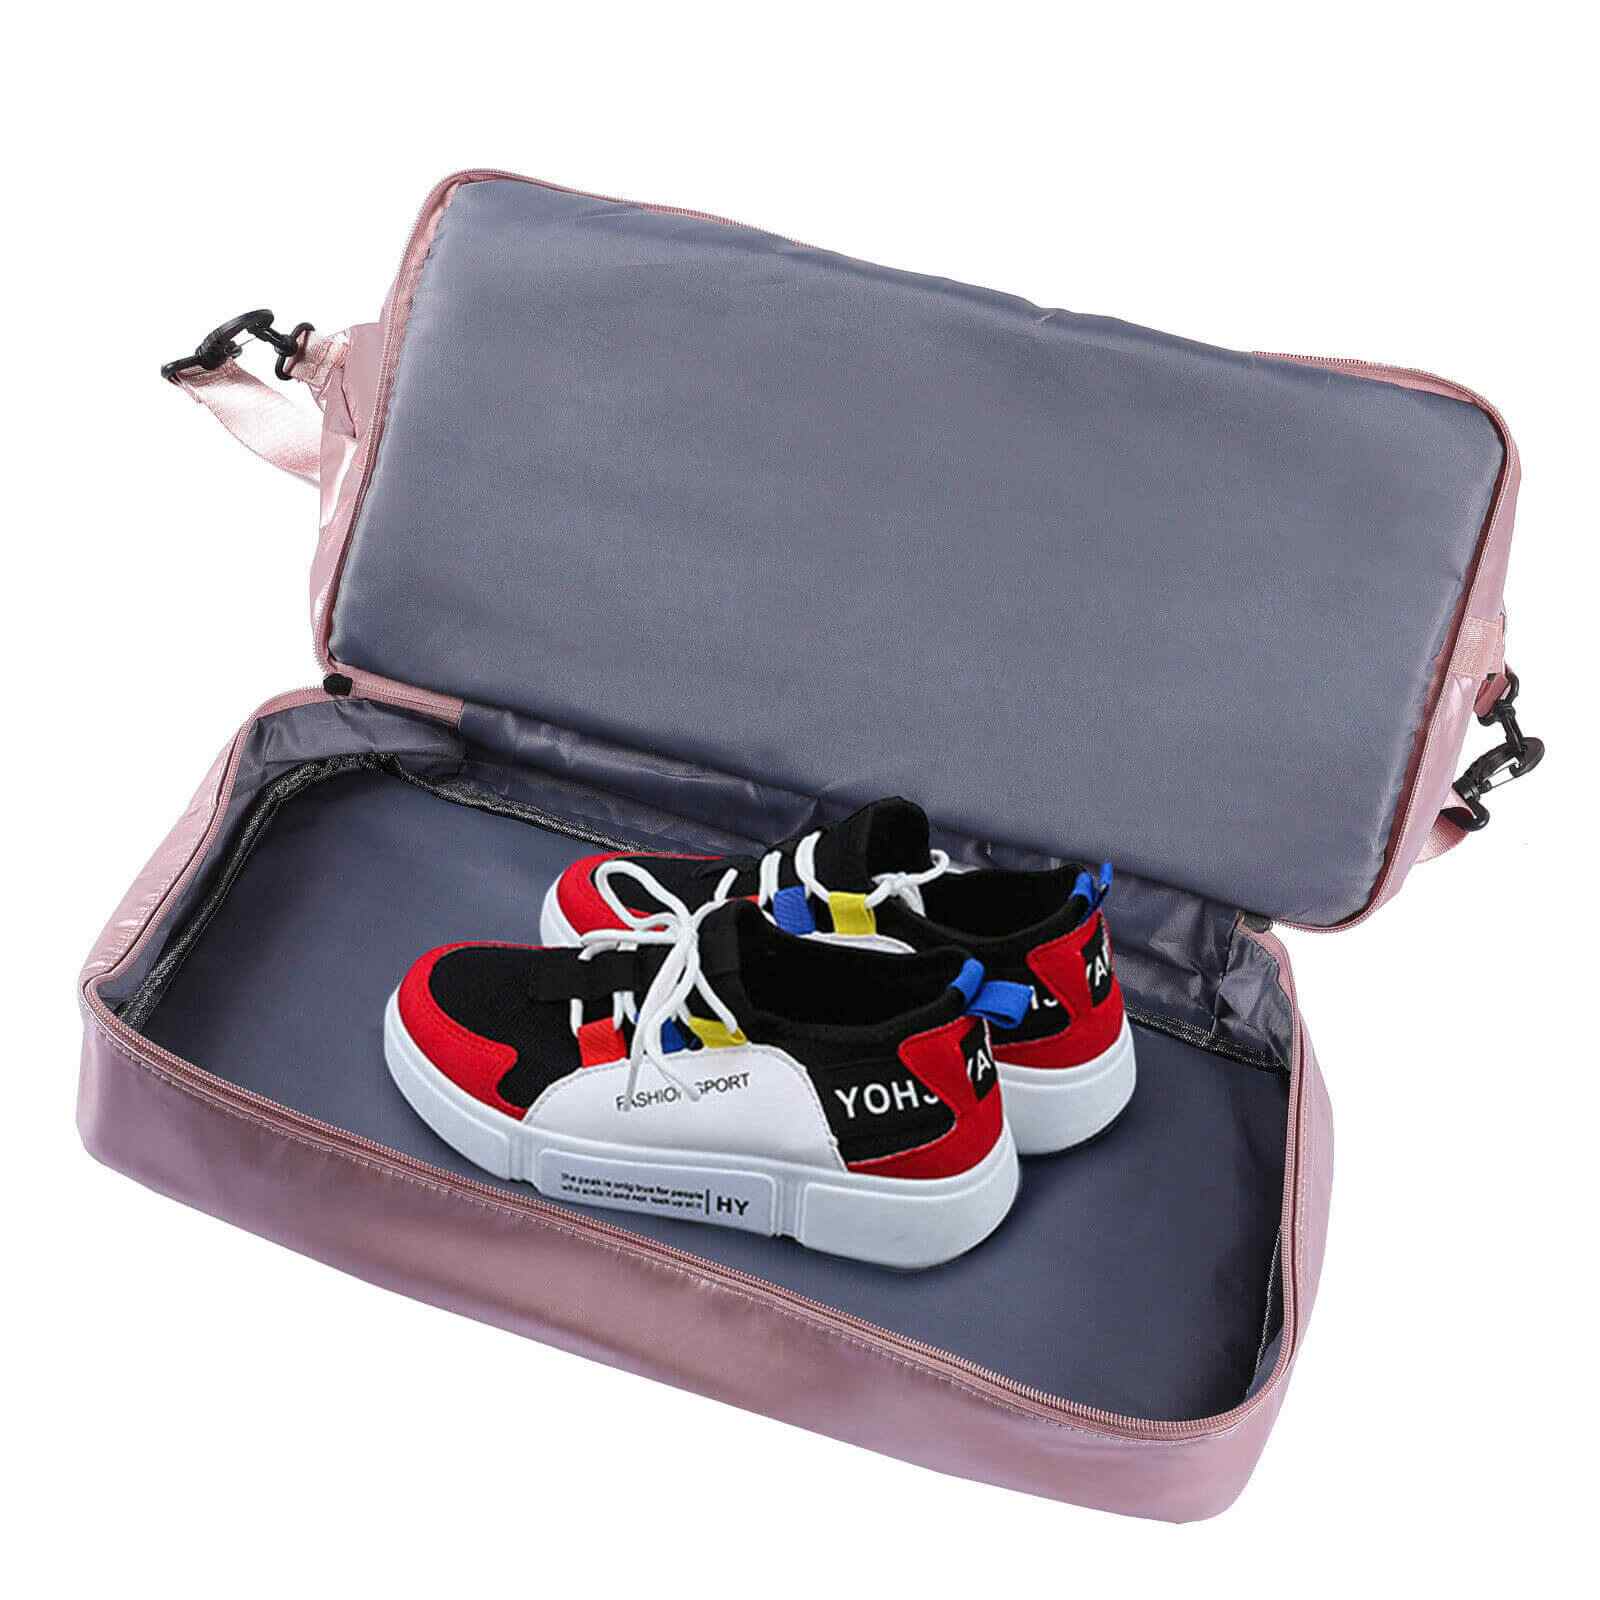 shoe compartment of 18" Large Travel Duffle Bag